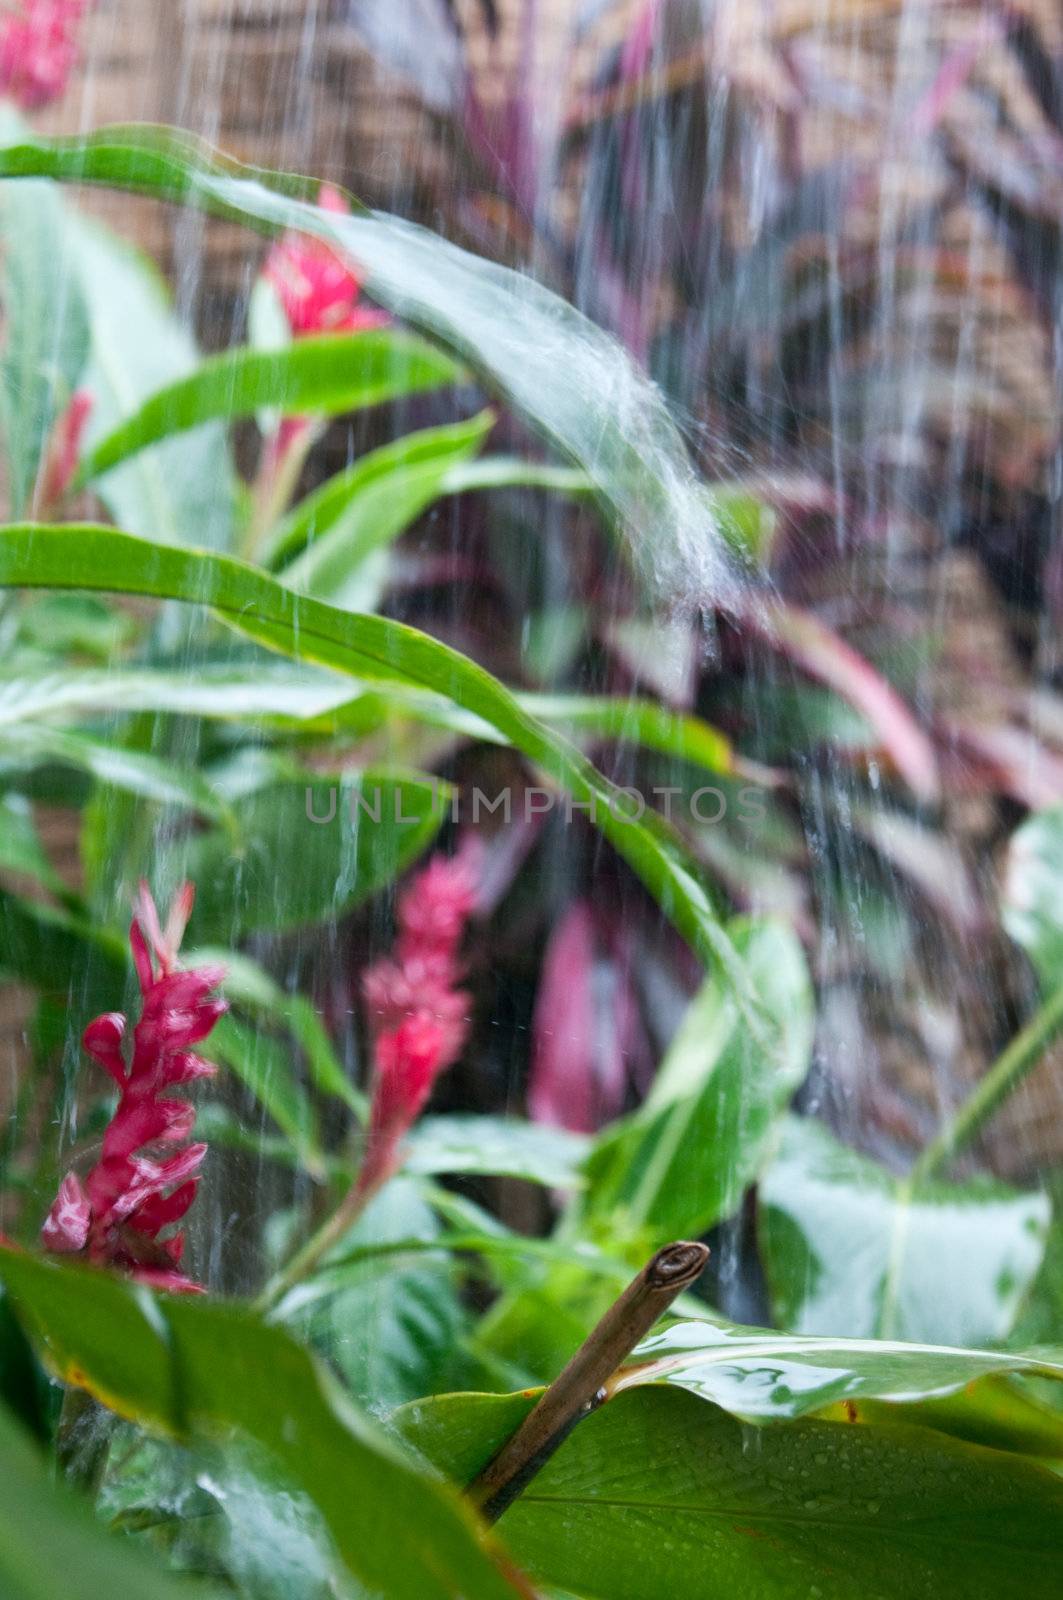 The picture of the flower under the rain